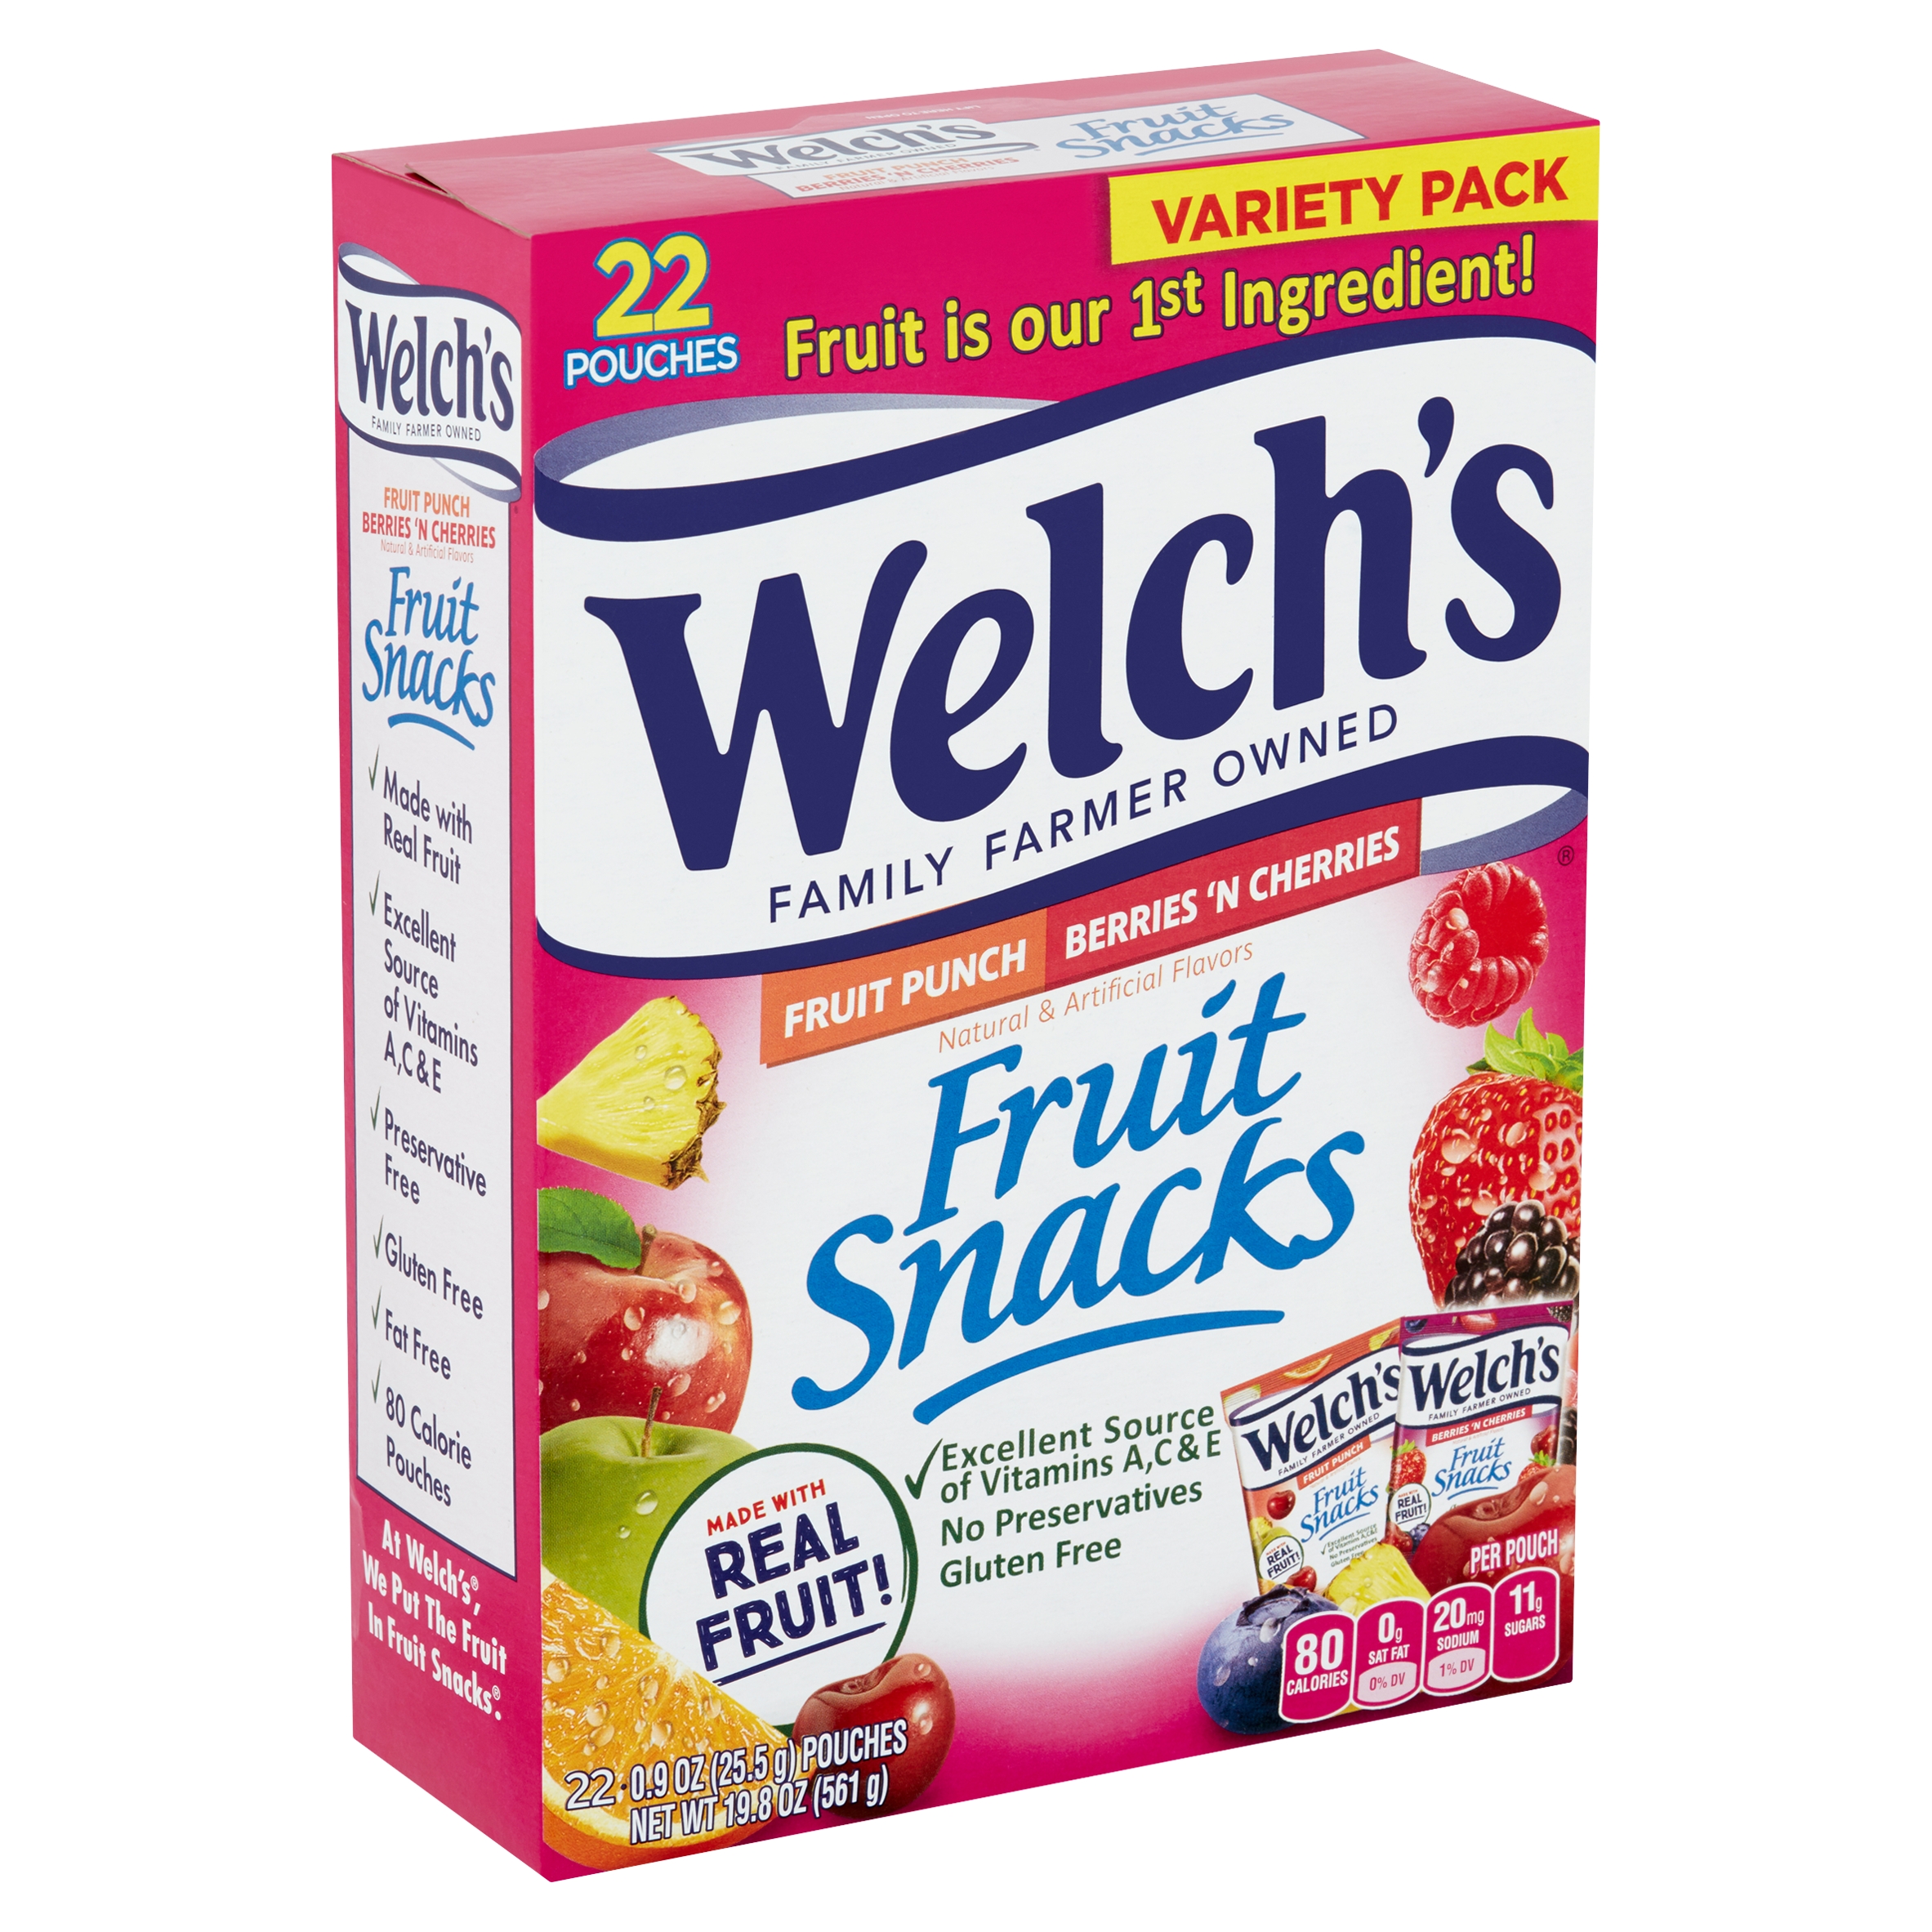 Welch's Fruit Punch and Berries 'N Cherries Fruit Snacks Variety Pack, 0.9 oz, 22 count - image 1 of 7